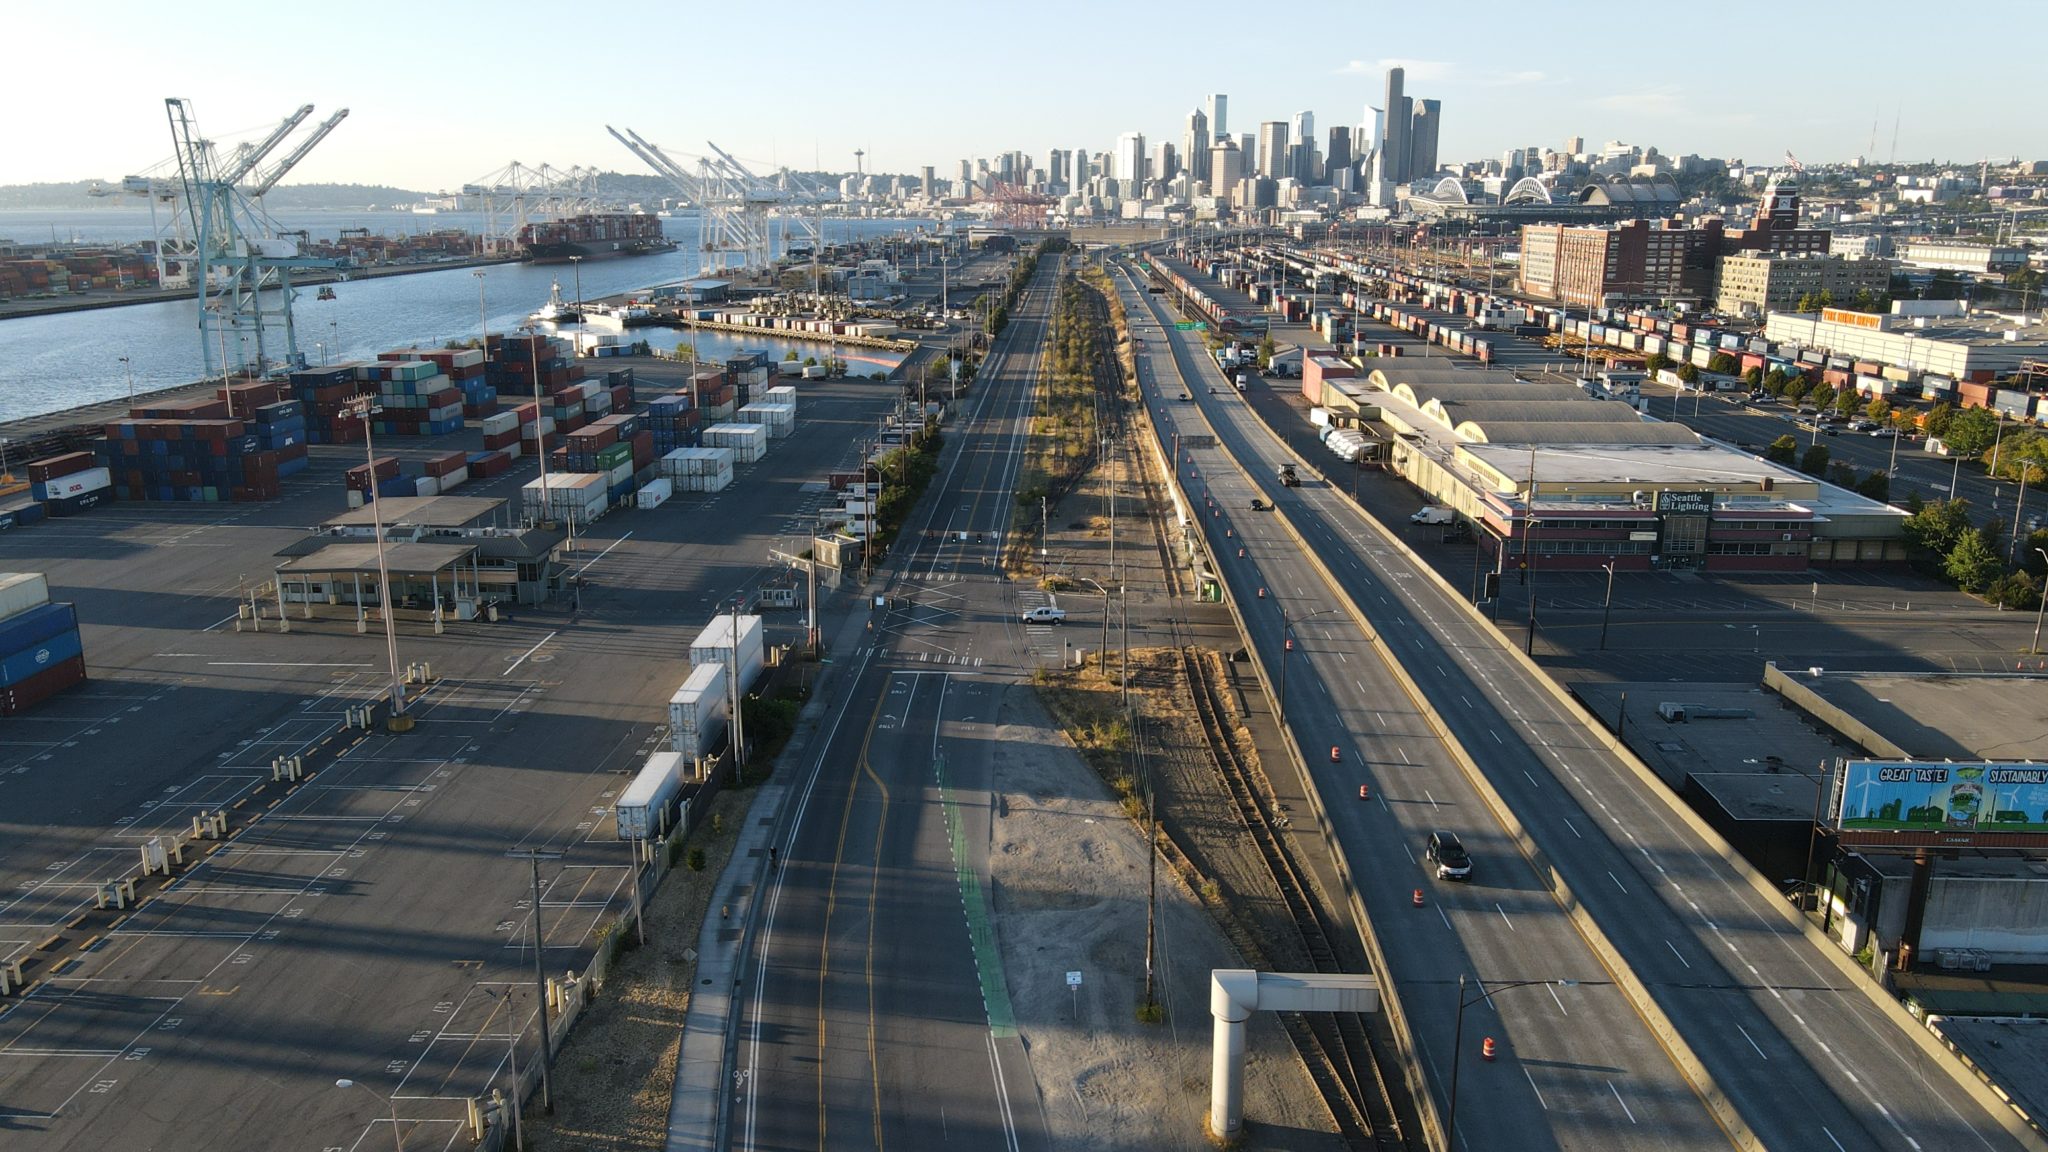 An aerial view of East Marginal Way S in Seattle, with the Port of Seattle to the left and downtown Seattle in the background, on a sunny day.